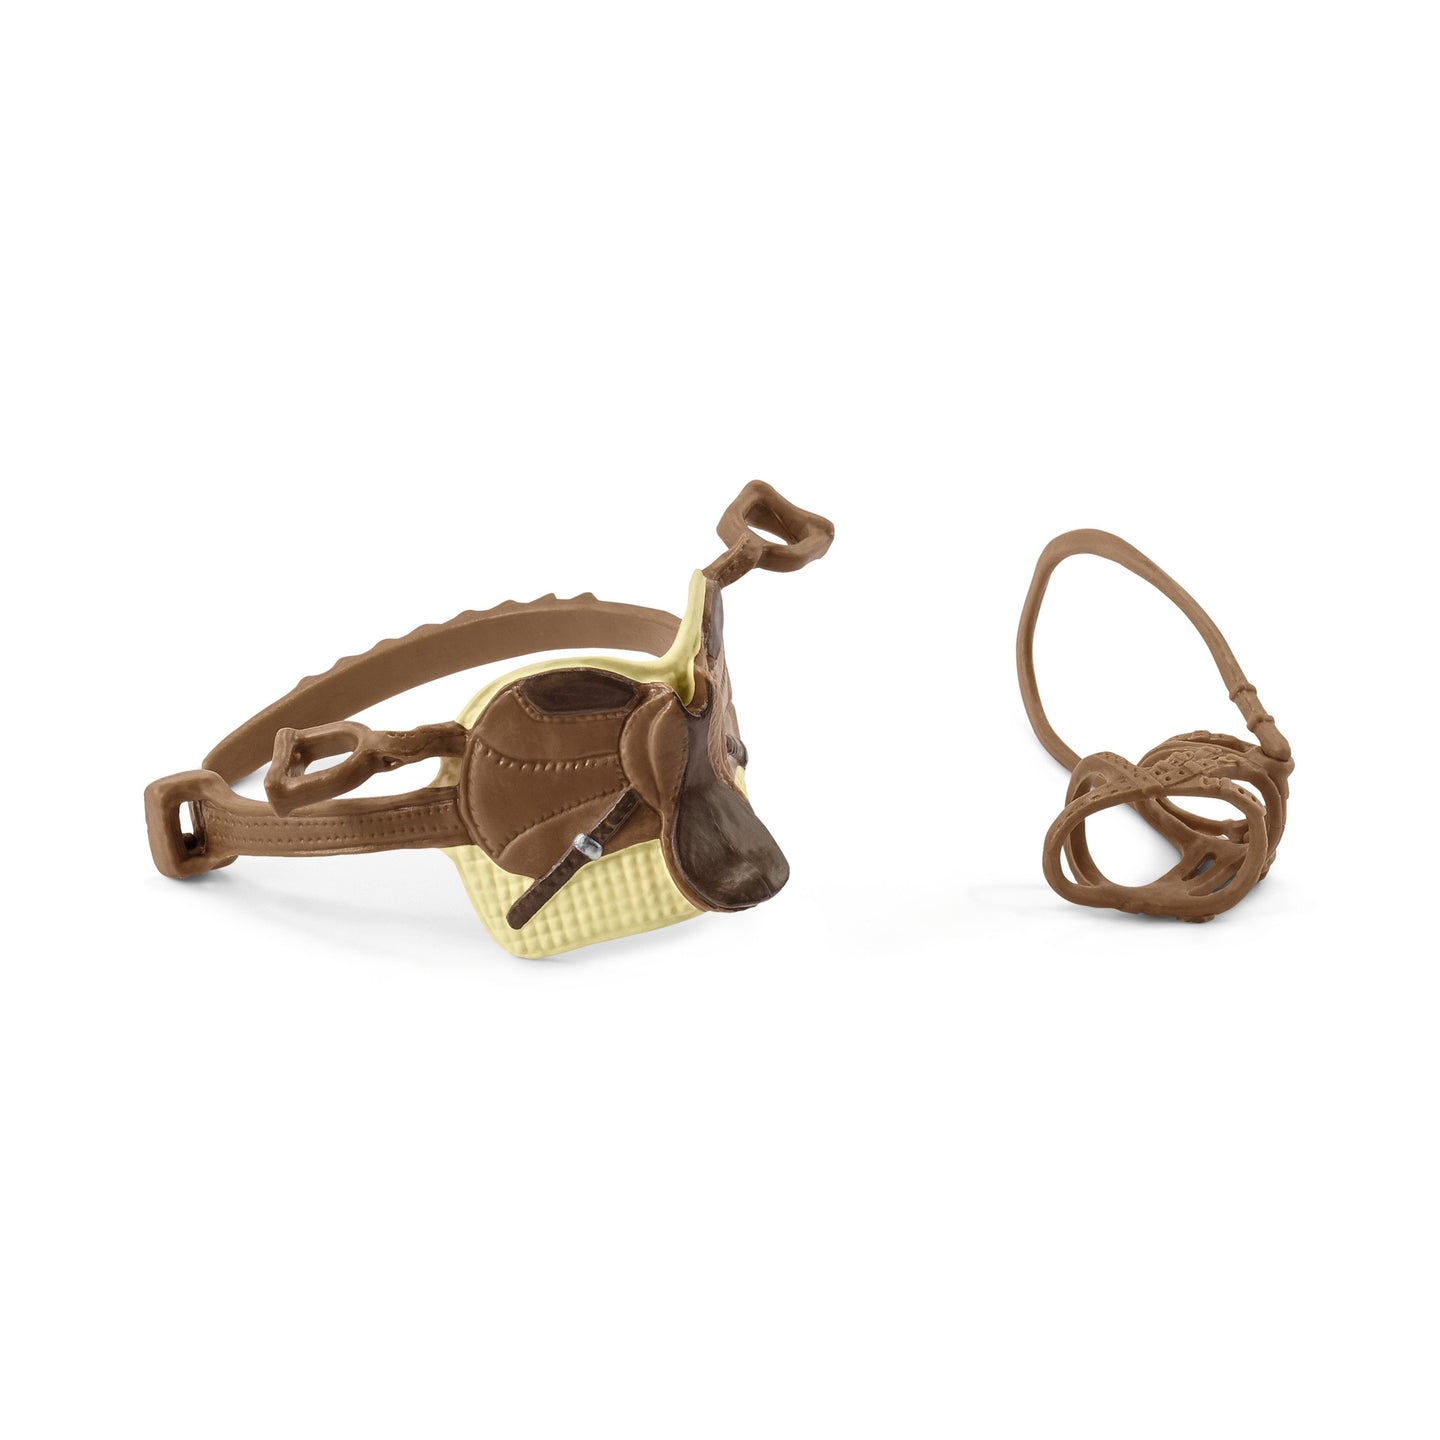 SL42492 Schleich Saddle and Bridle - Yellow Saddle Cloth